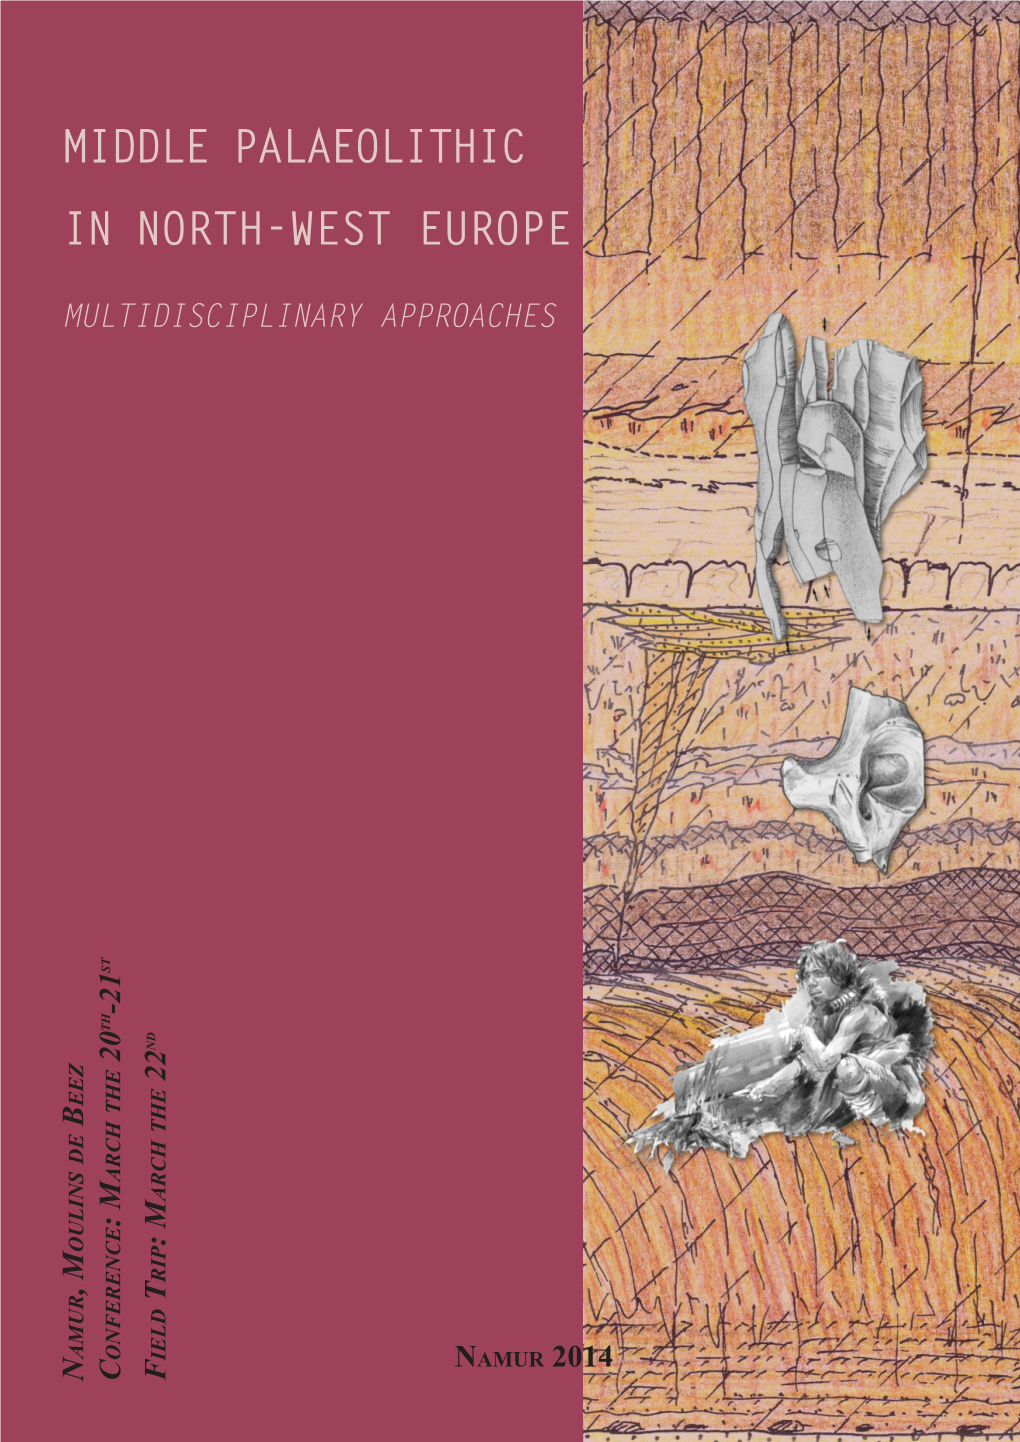 Middle Palaeolithic in North-West Europe: Multidisciplinary Approaches